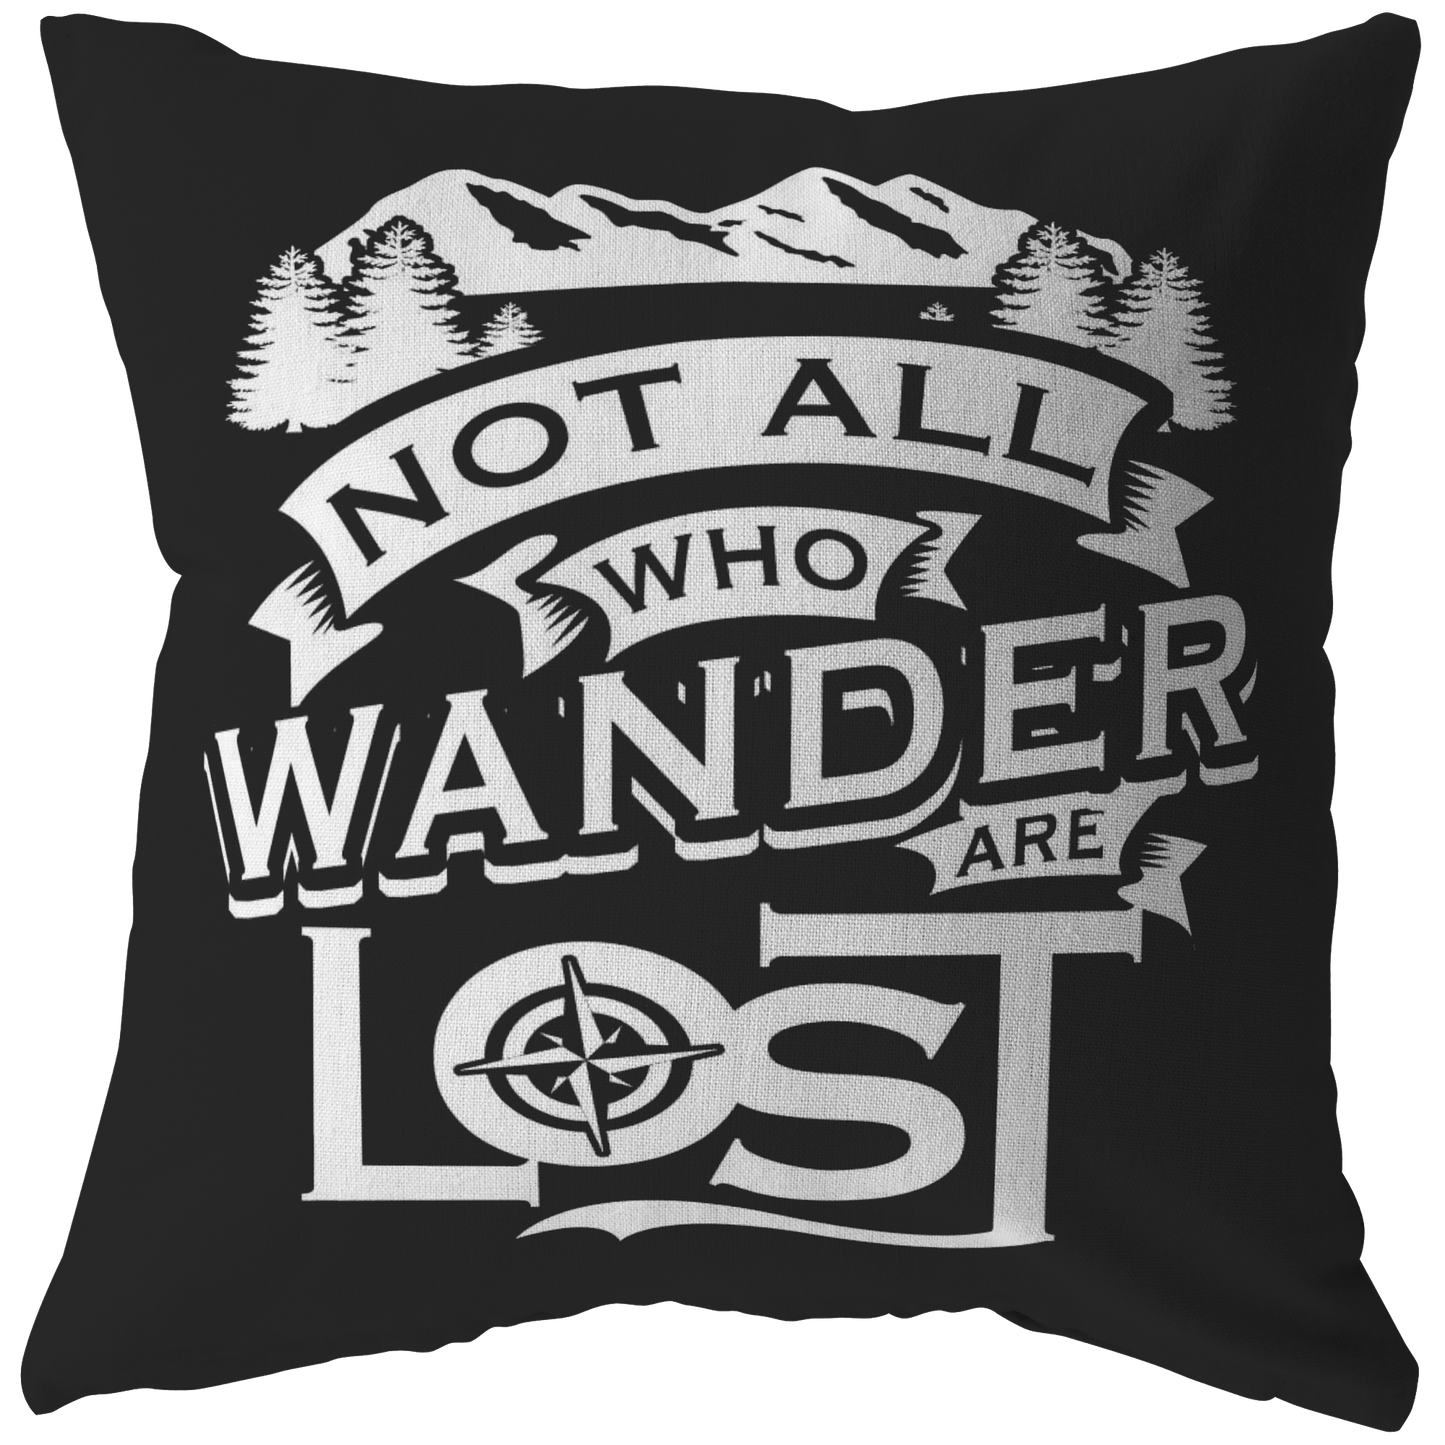 "Not All Who Wander Are Lost" - Pillow